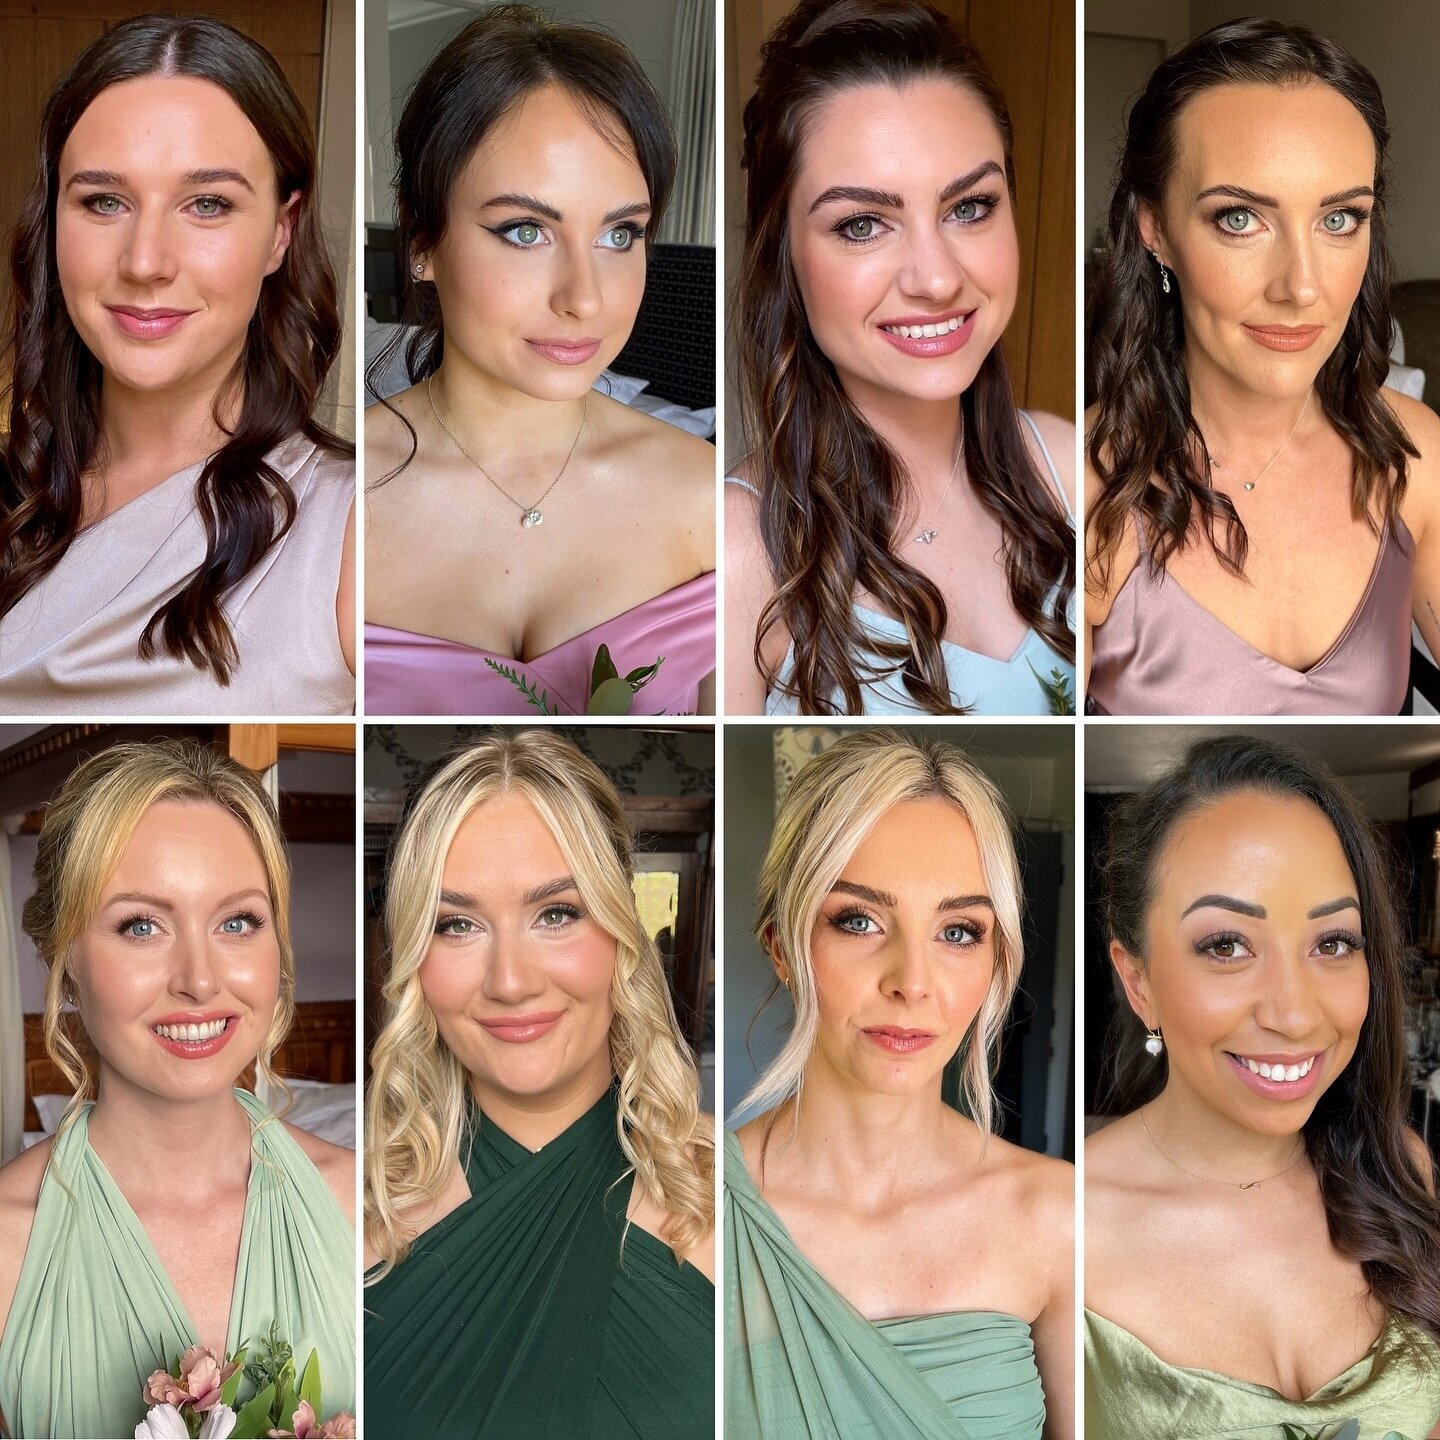 BRIDESMAIDS ~ this one&rsquo;s for you! I find a lot of brides are pretty easy going about their maids makeup these days, so always try to work within a neutral colour palette to achieve the look both bridesmaid and bride feel happy with. Usually wit